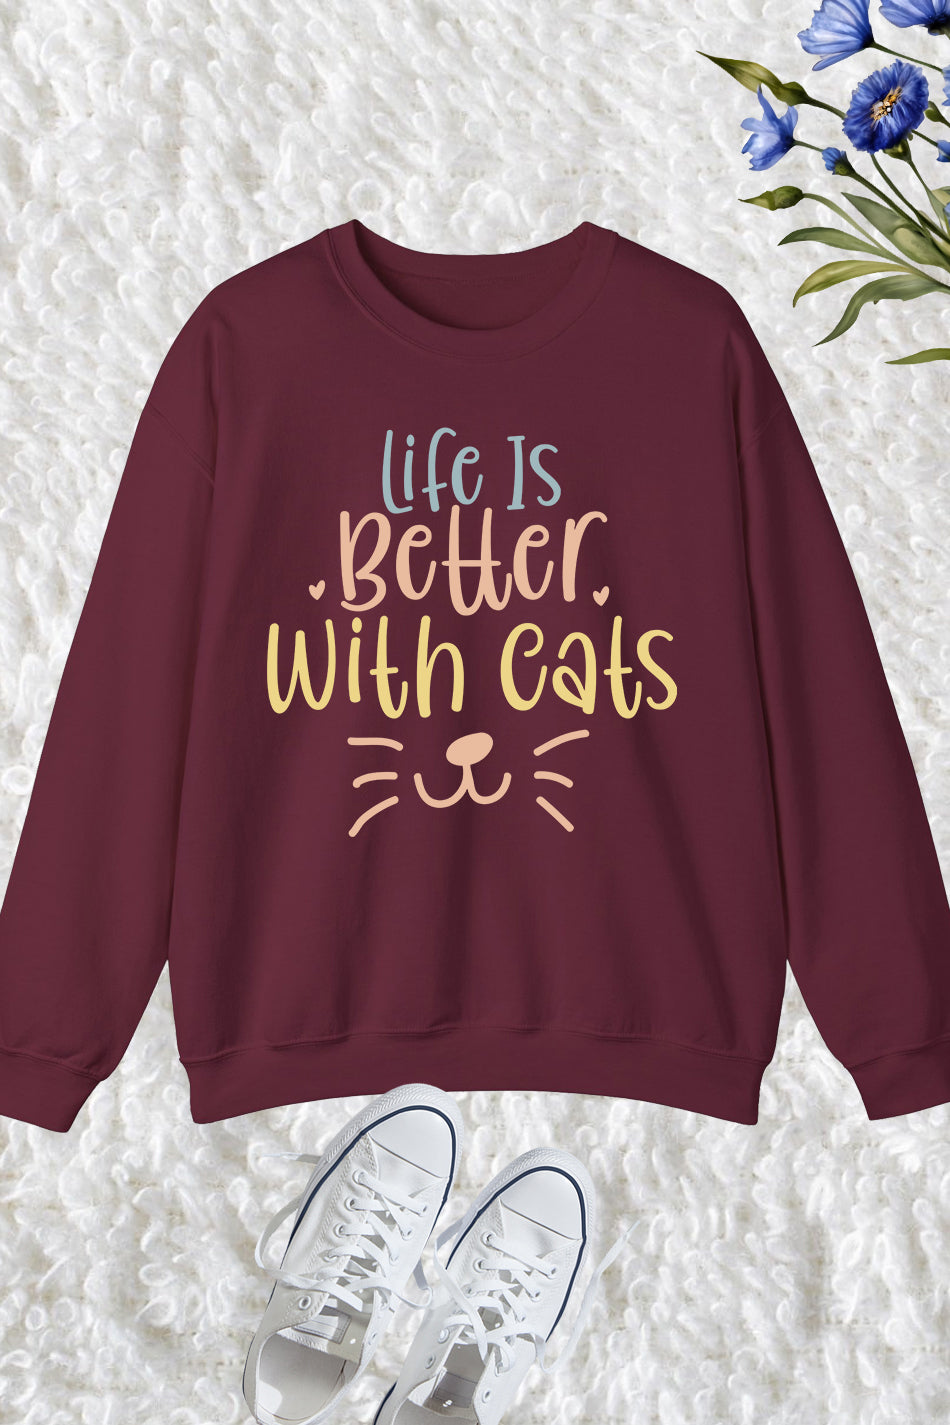 Life's Better with Cats Sweatshirt